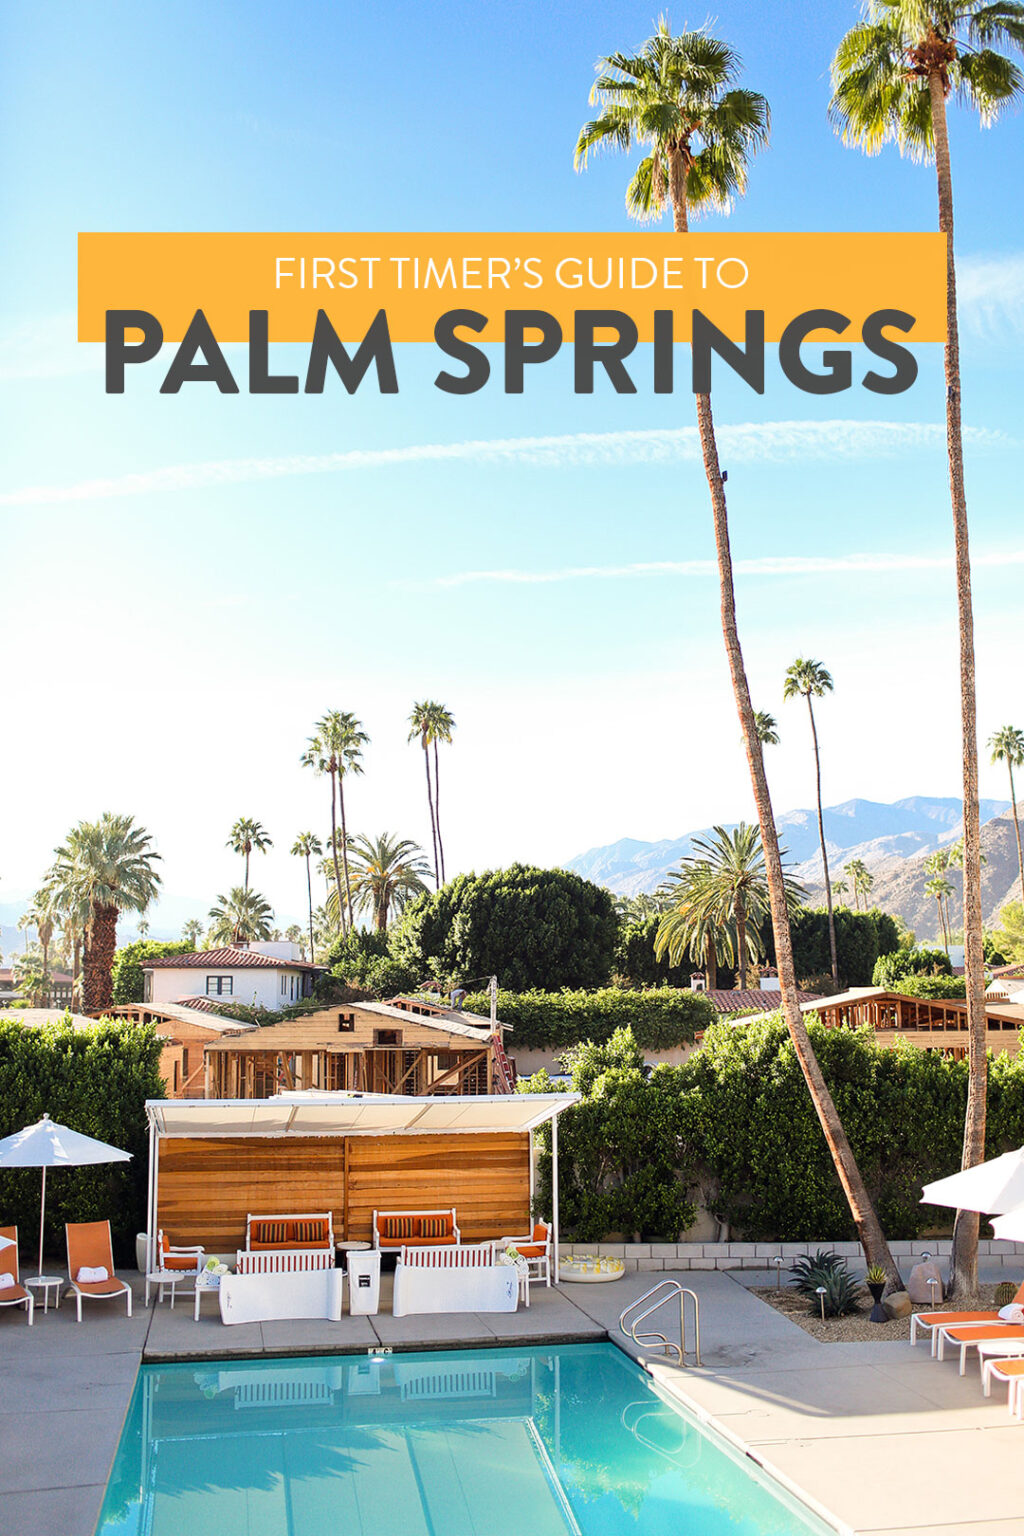 15 Things to Do in Palm Springs California